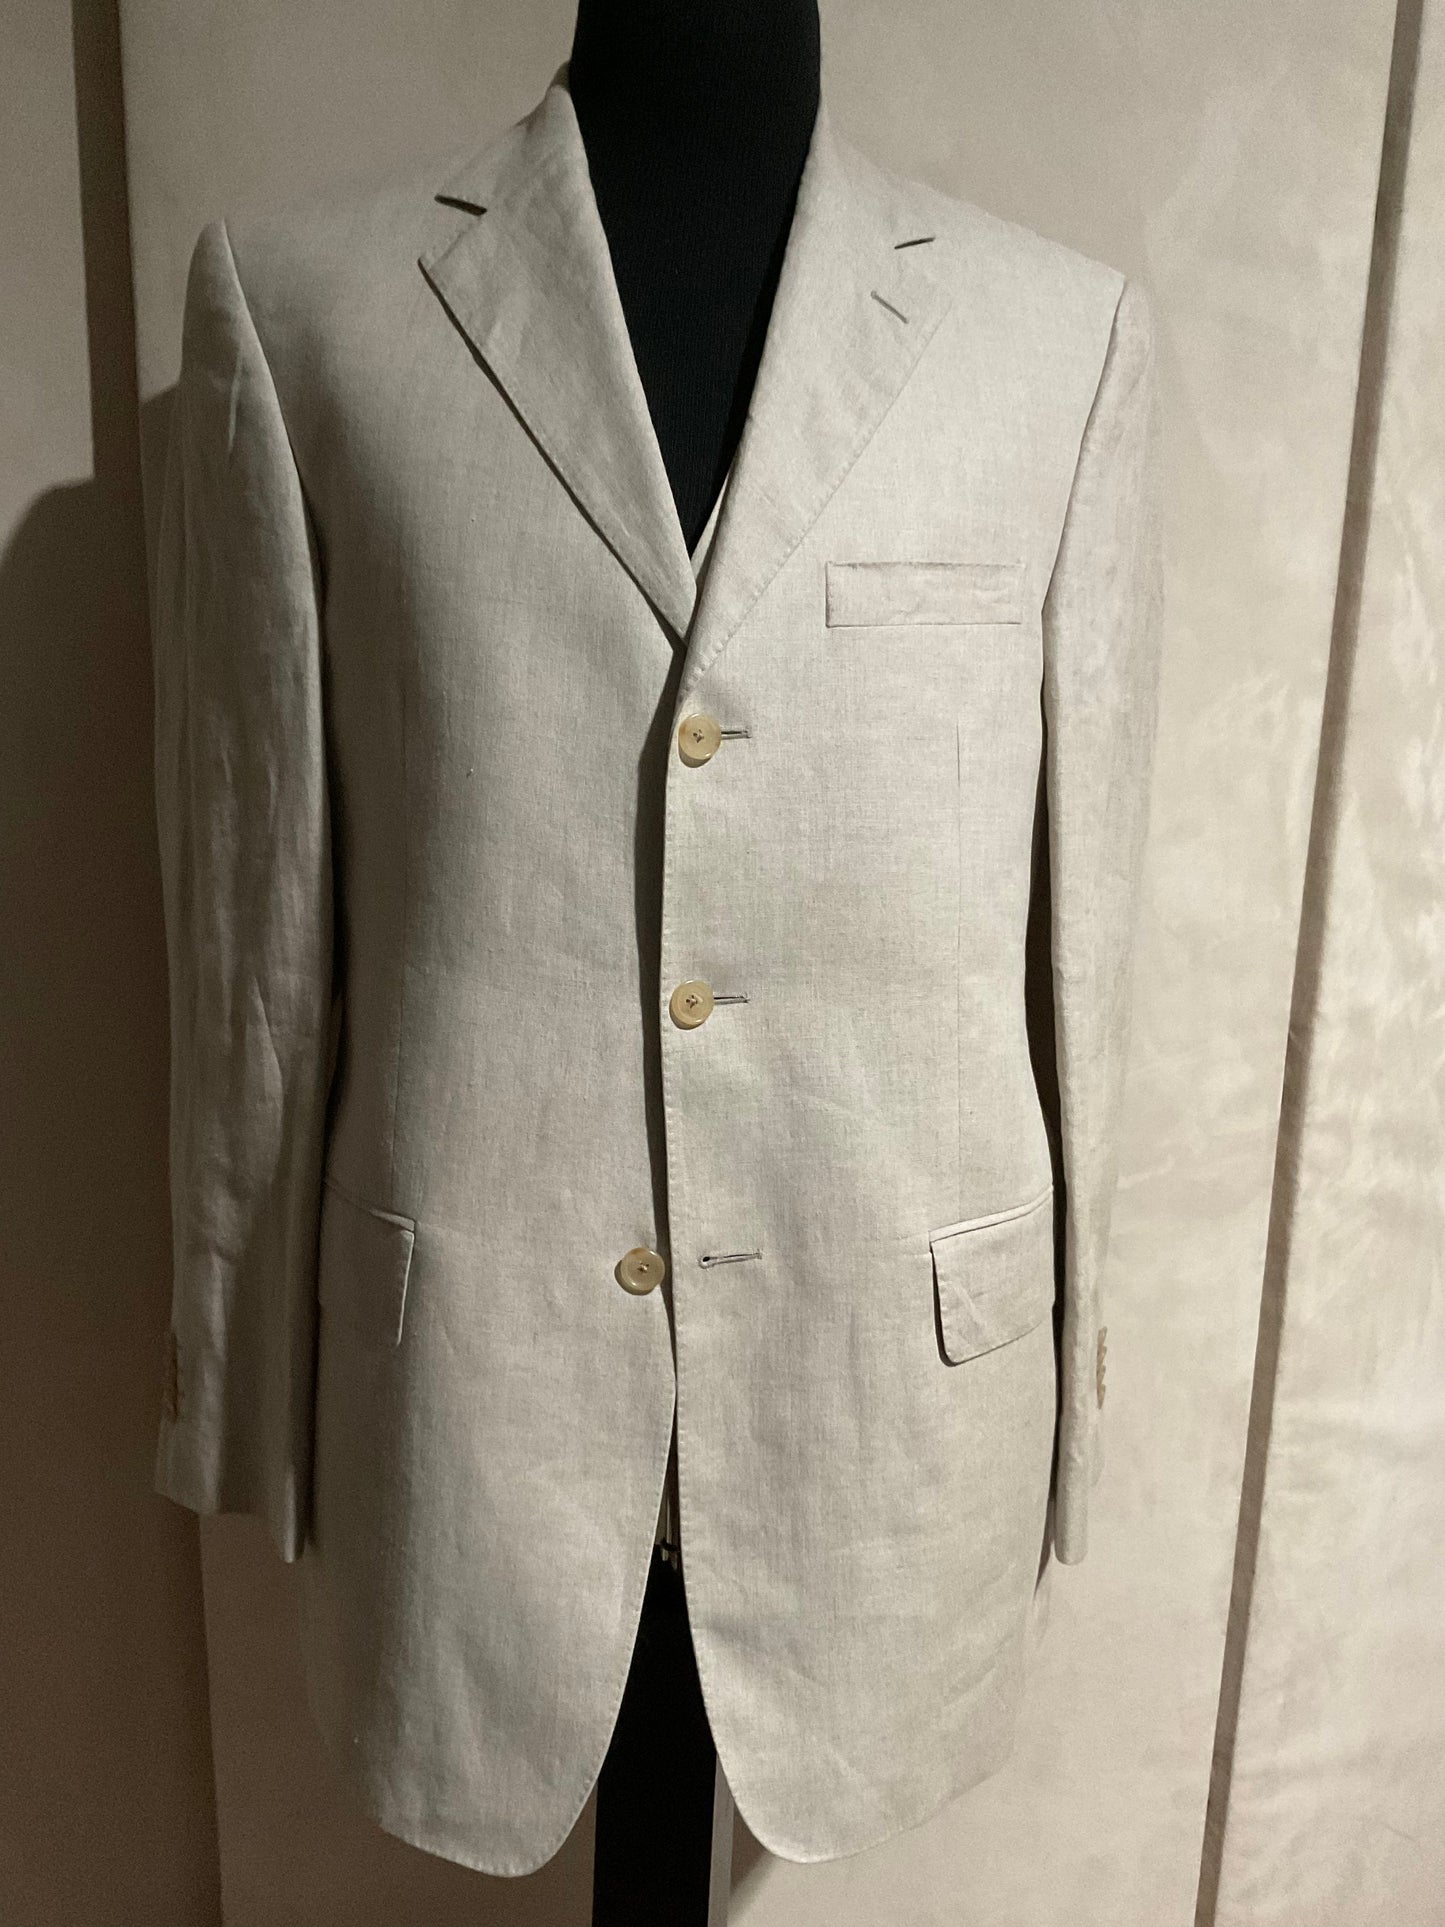 R P SUIT / BEIGE NATURAL LINEN / 3 PIECE VESTED / 40 REG / NEW / MADE IN CANADA